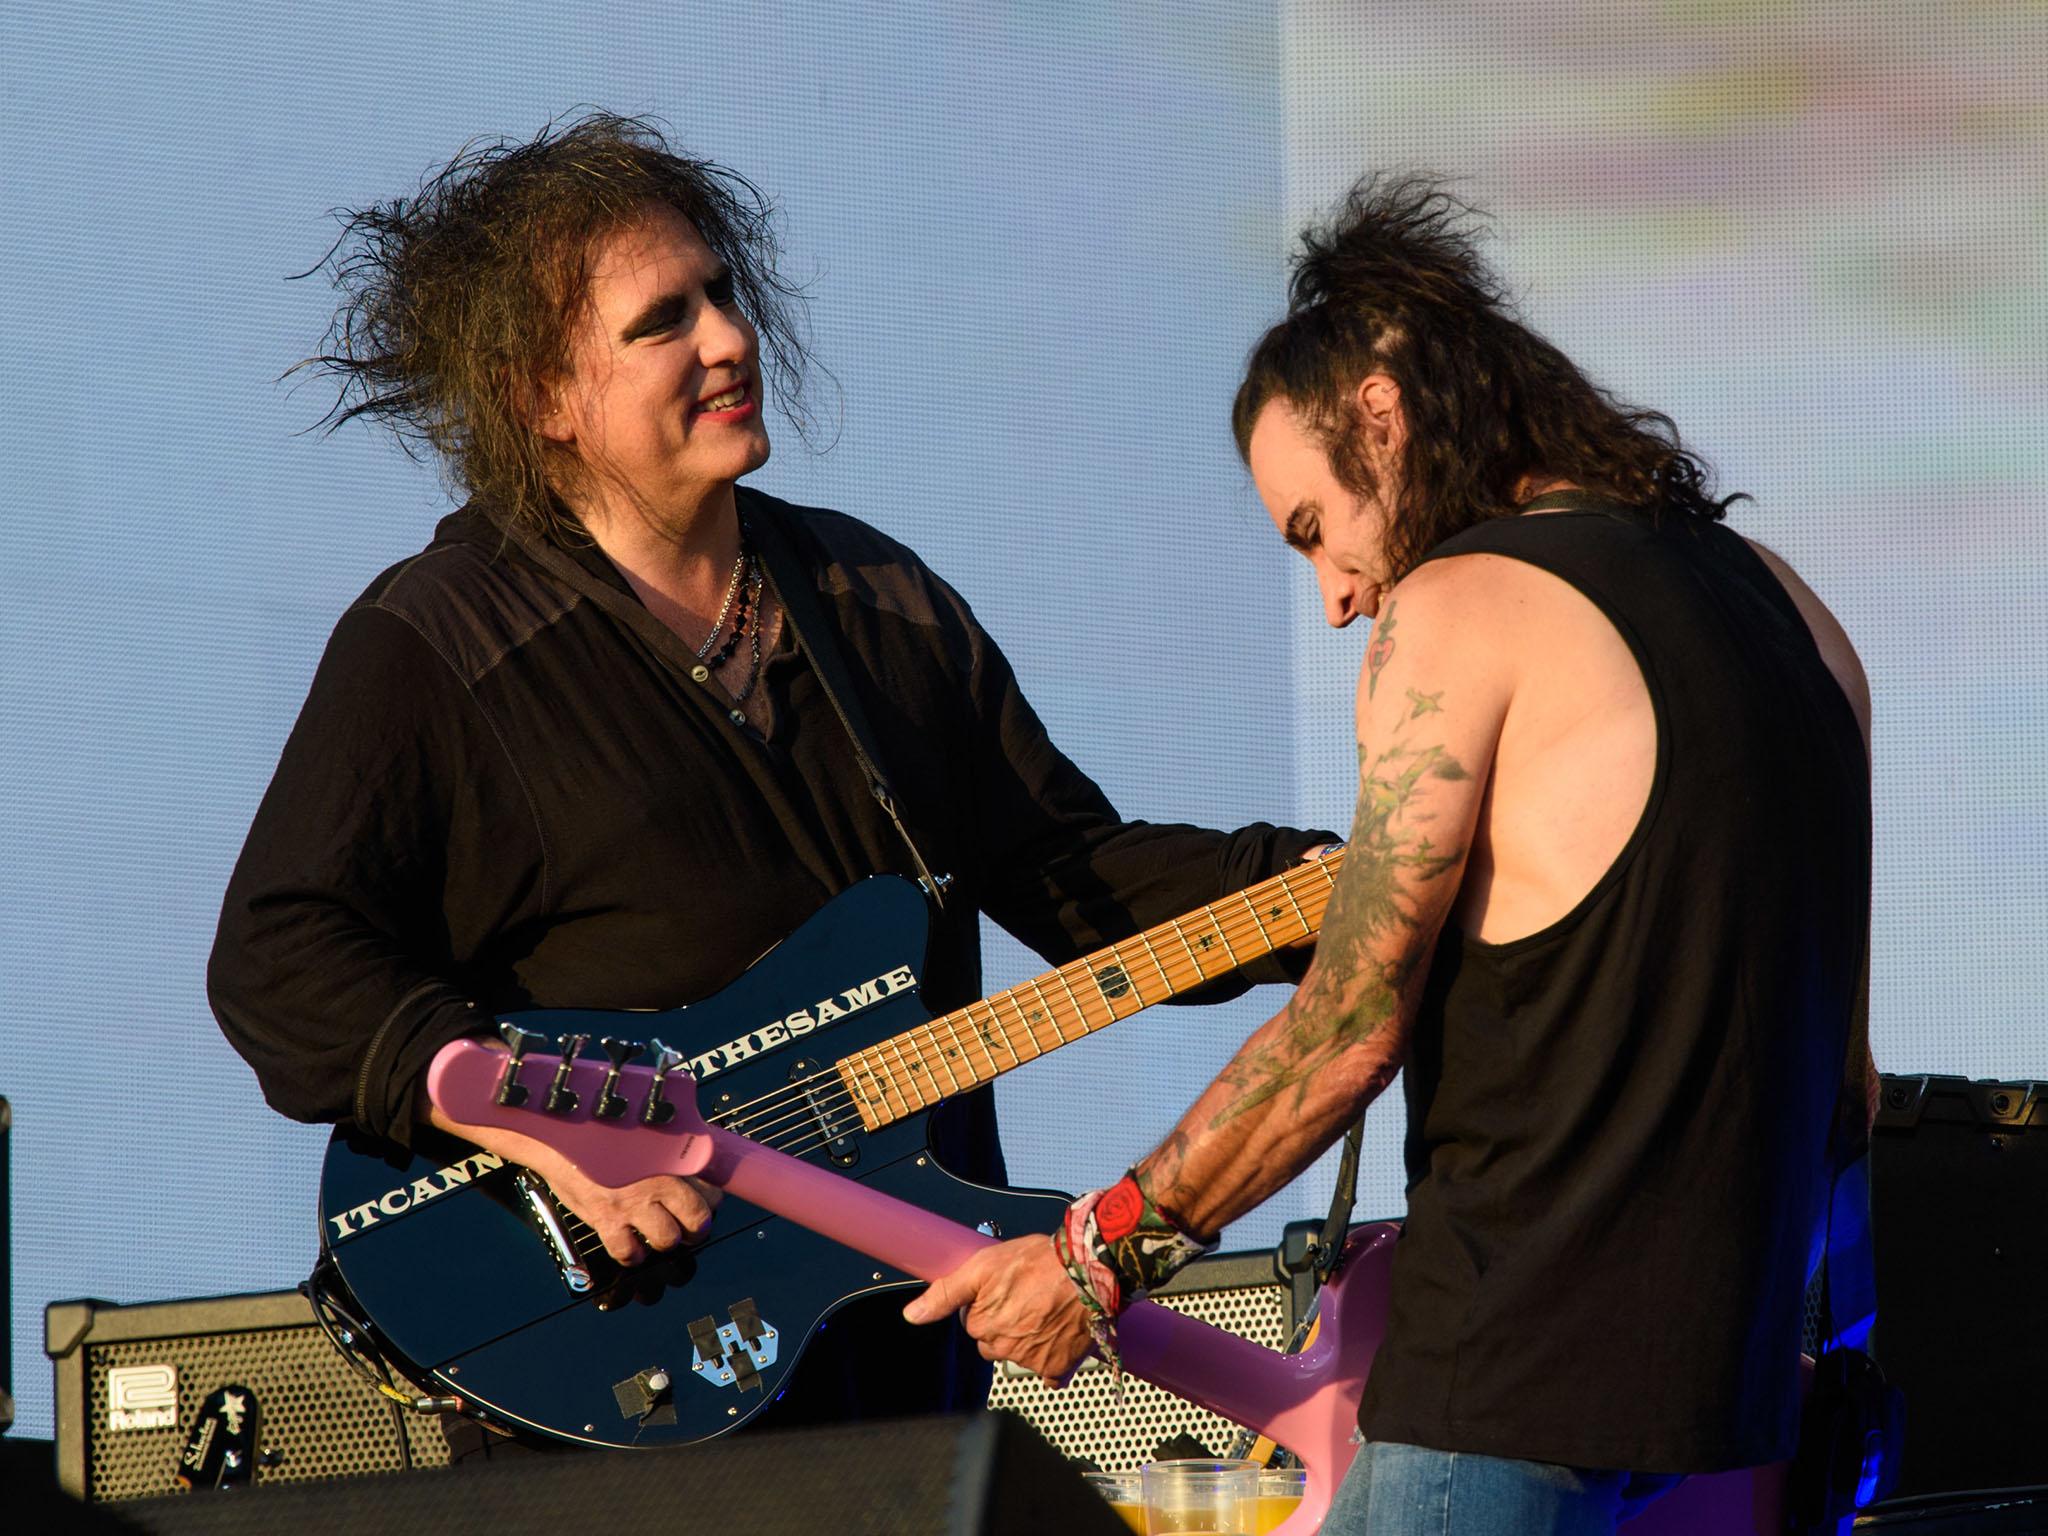 The Cure performing at British Summer Time in 2018